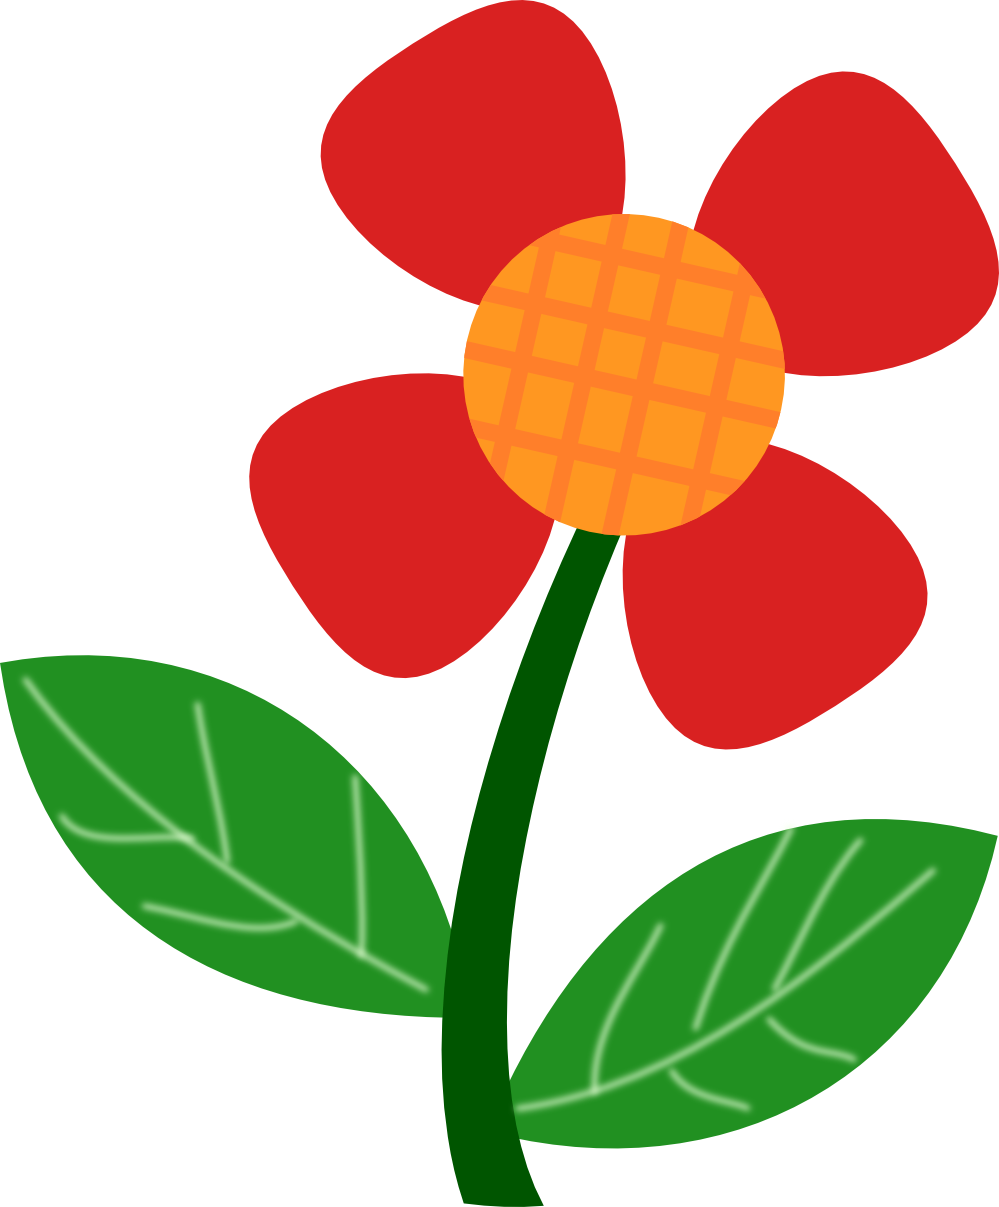 Free clipart images of flowers flower clip art pictures